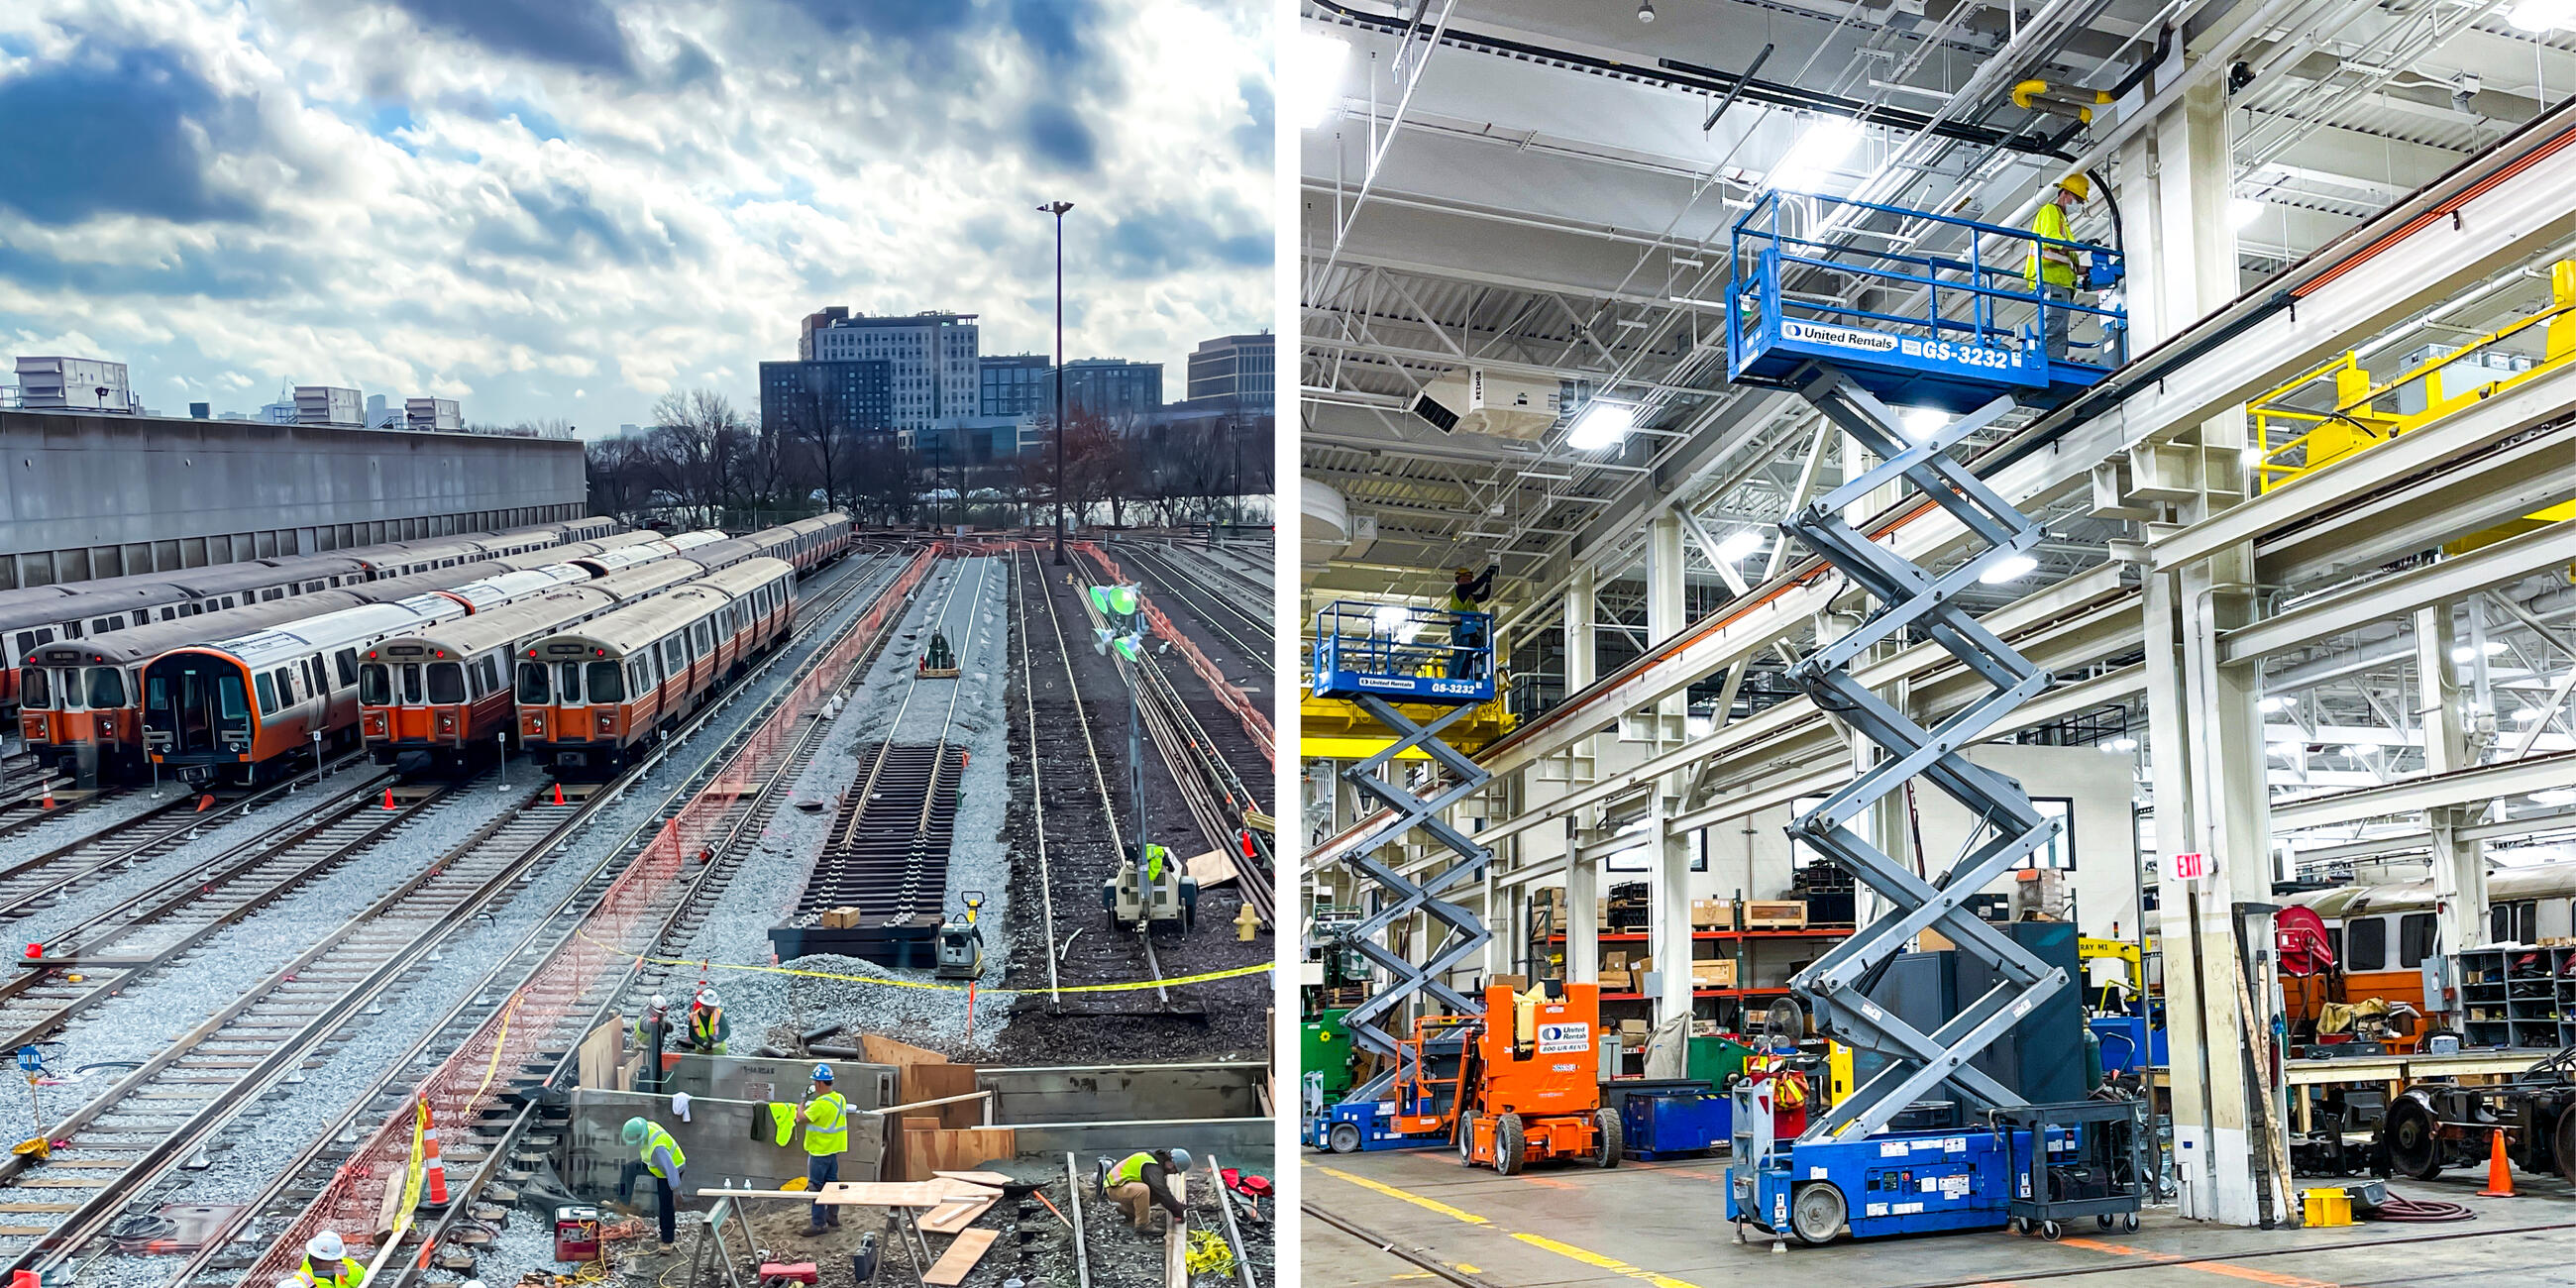 A photo of orange line trains at wellington yard next to a photo of crews working inside the train yard facility 